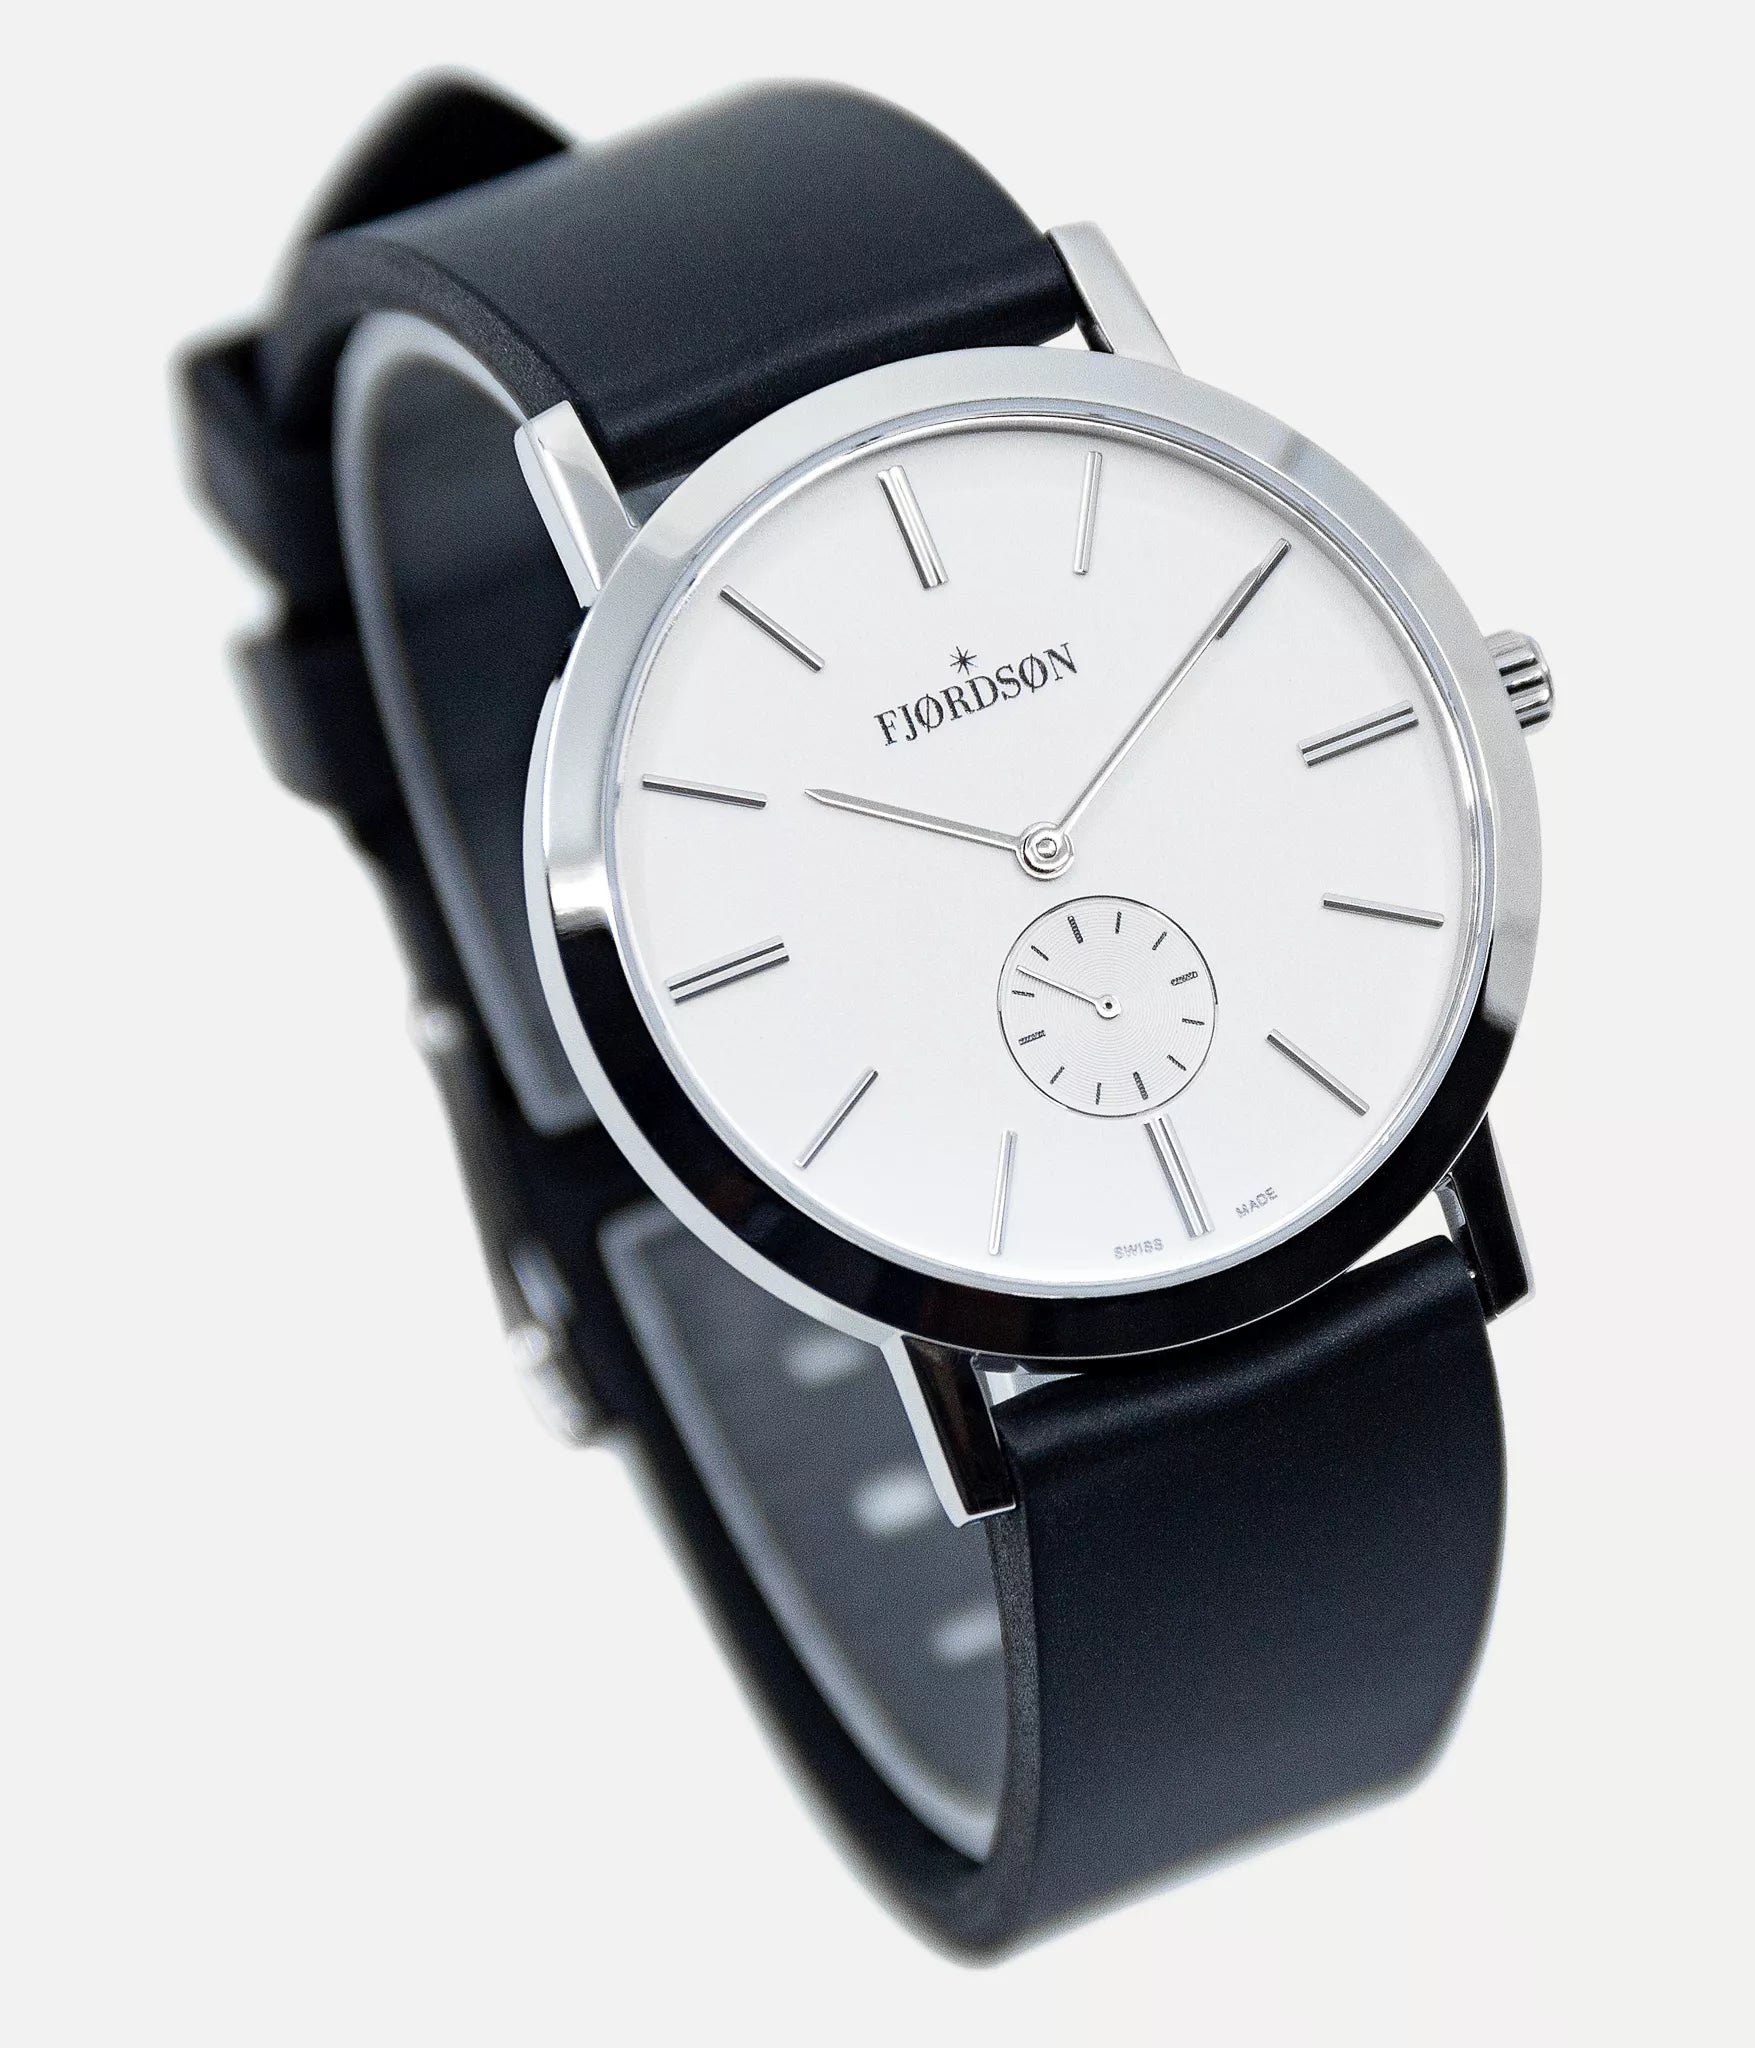 Strap on white dial watch UNISEX shot - Fjordson Black Rubber Watch strap silver buckle - MEN - vegan & approved by PETA - Swiss made